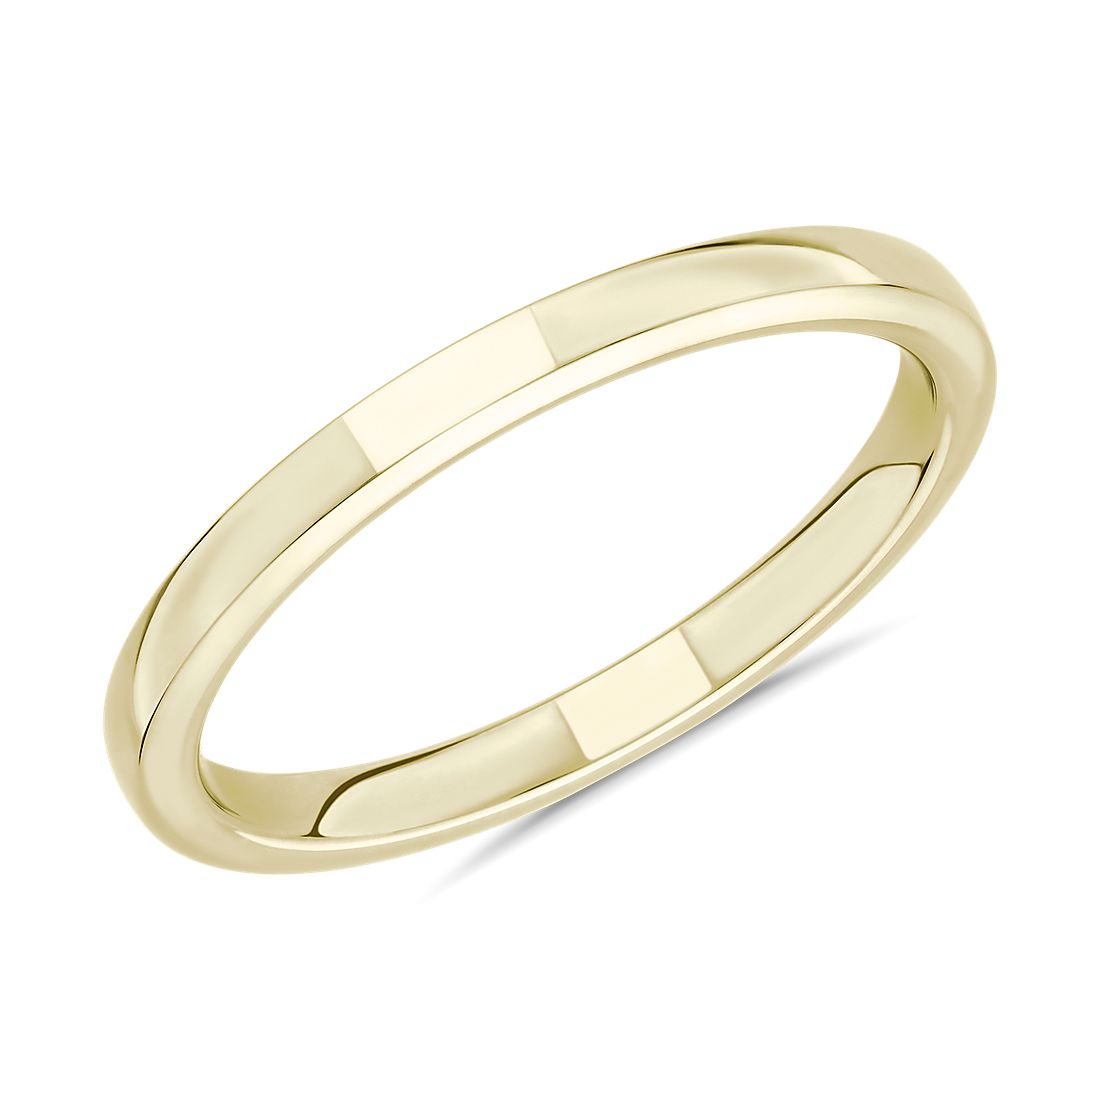 Skyline Comfort Fit Wedding Ring in 18k Yellow Gold (2 mm)